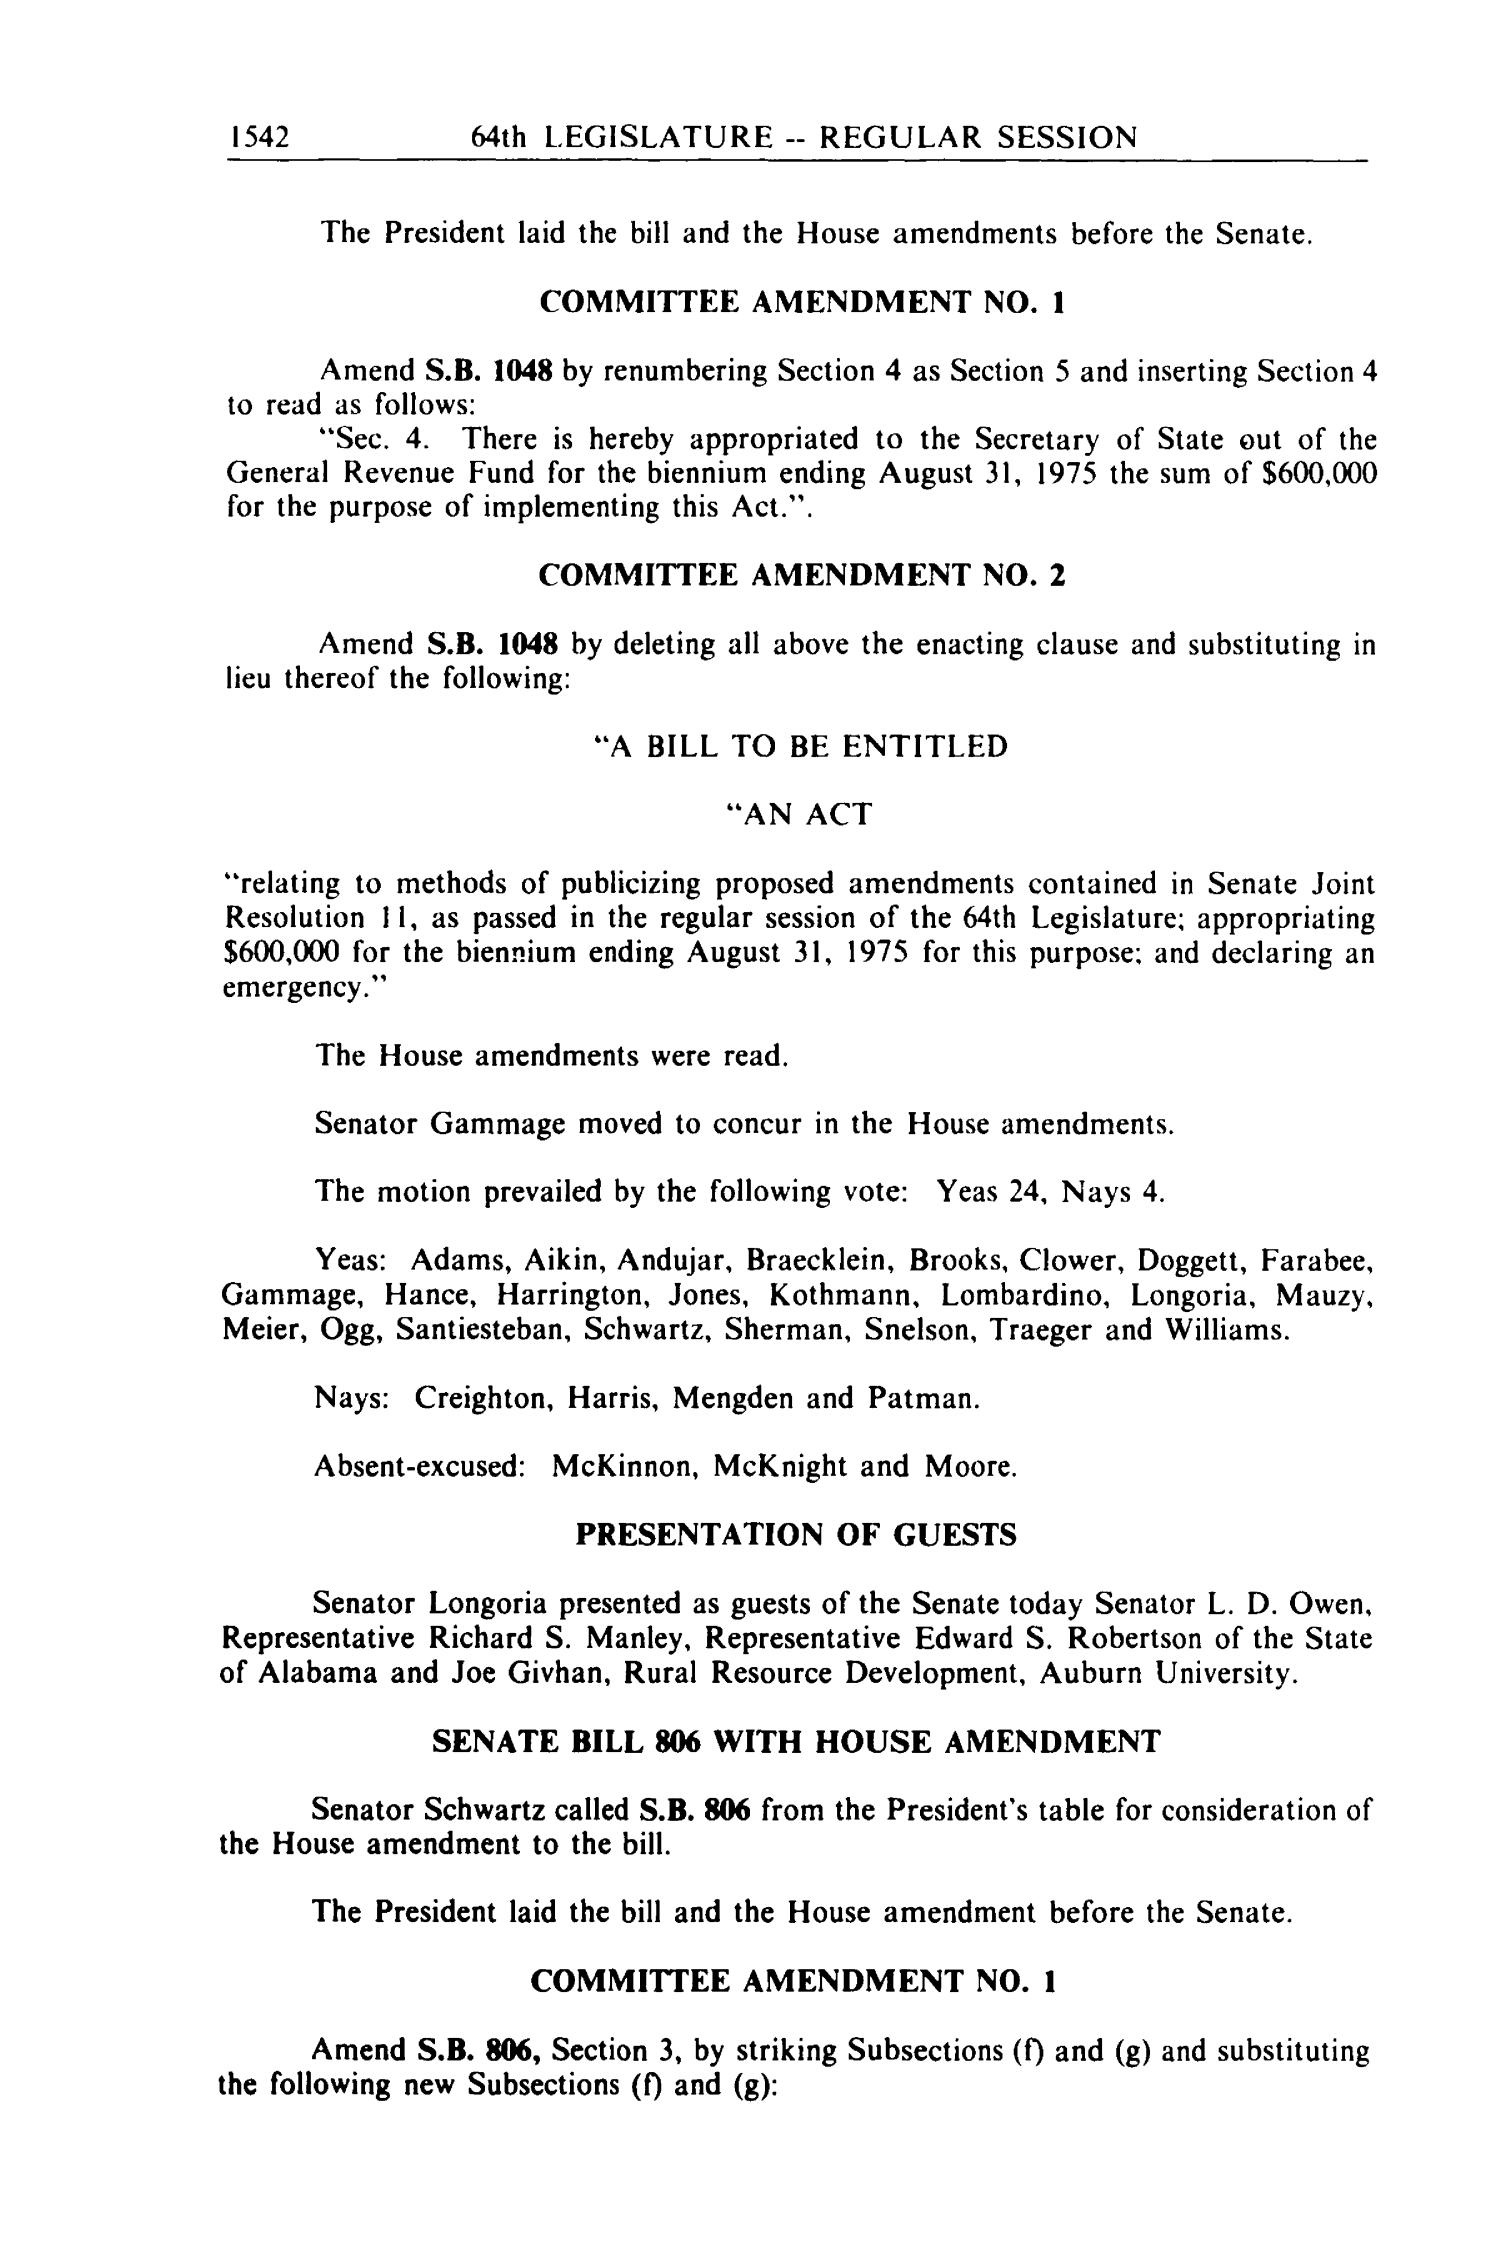 Journal of the Senate of the State of Texas, Regular Session of the Sixty-Fourth Legislature, Volume 2
                                                
                                                    1542
                                                